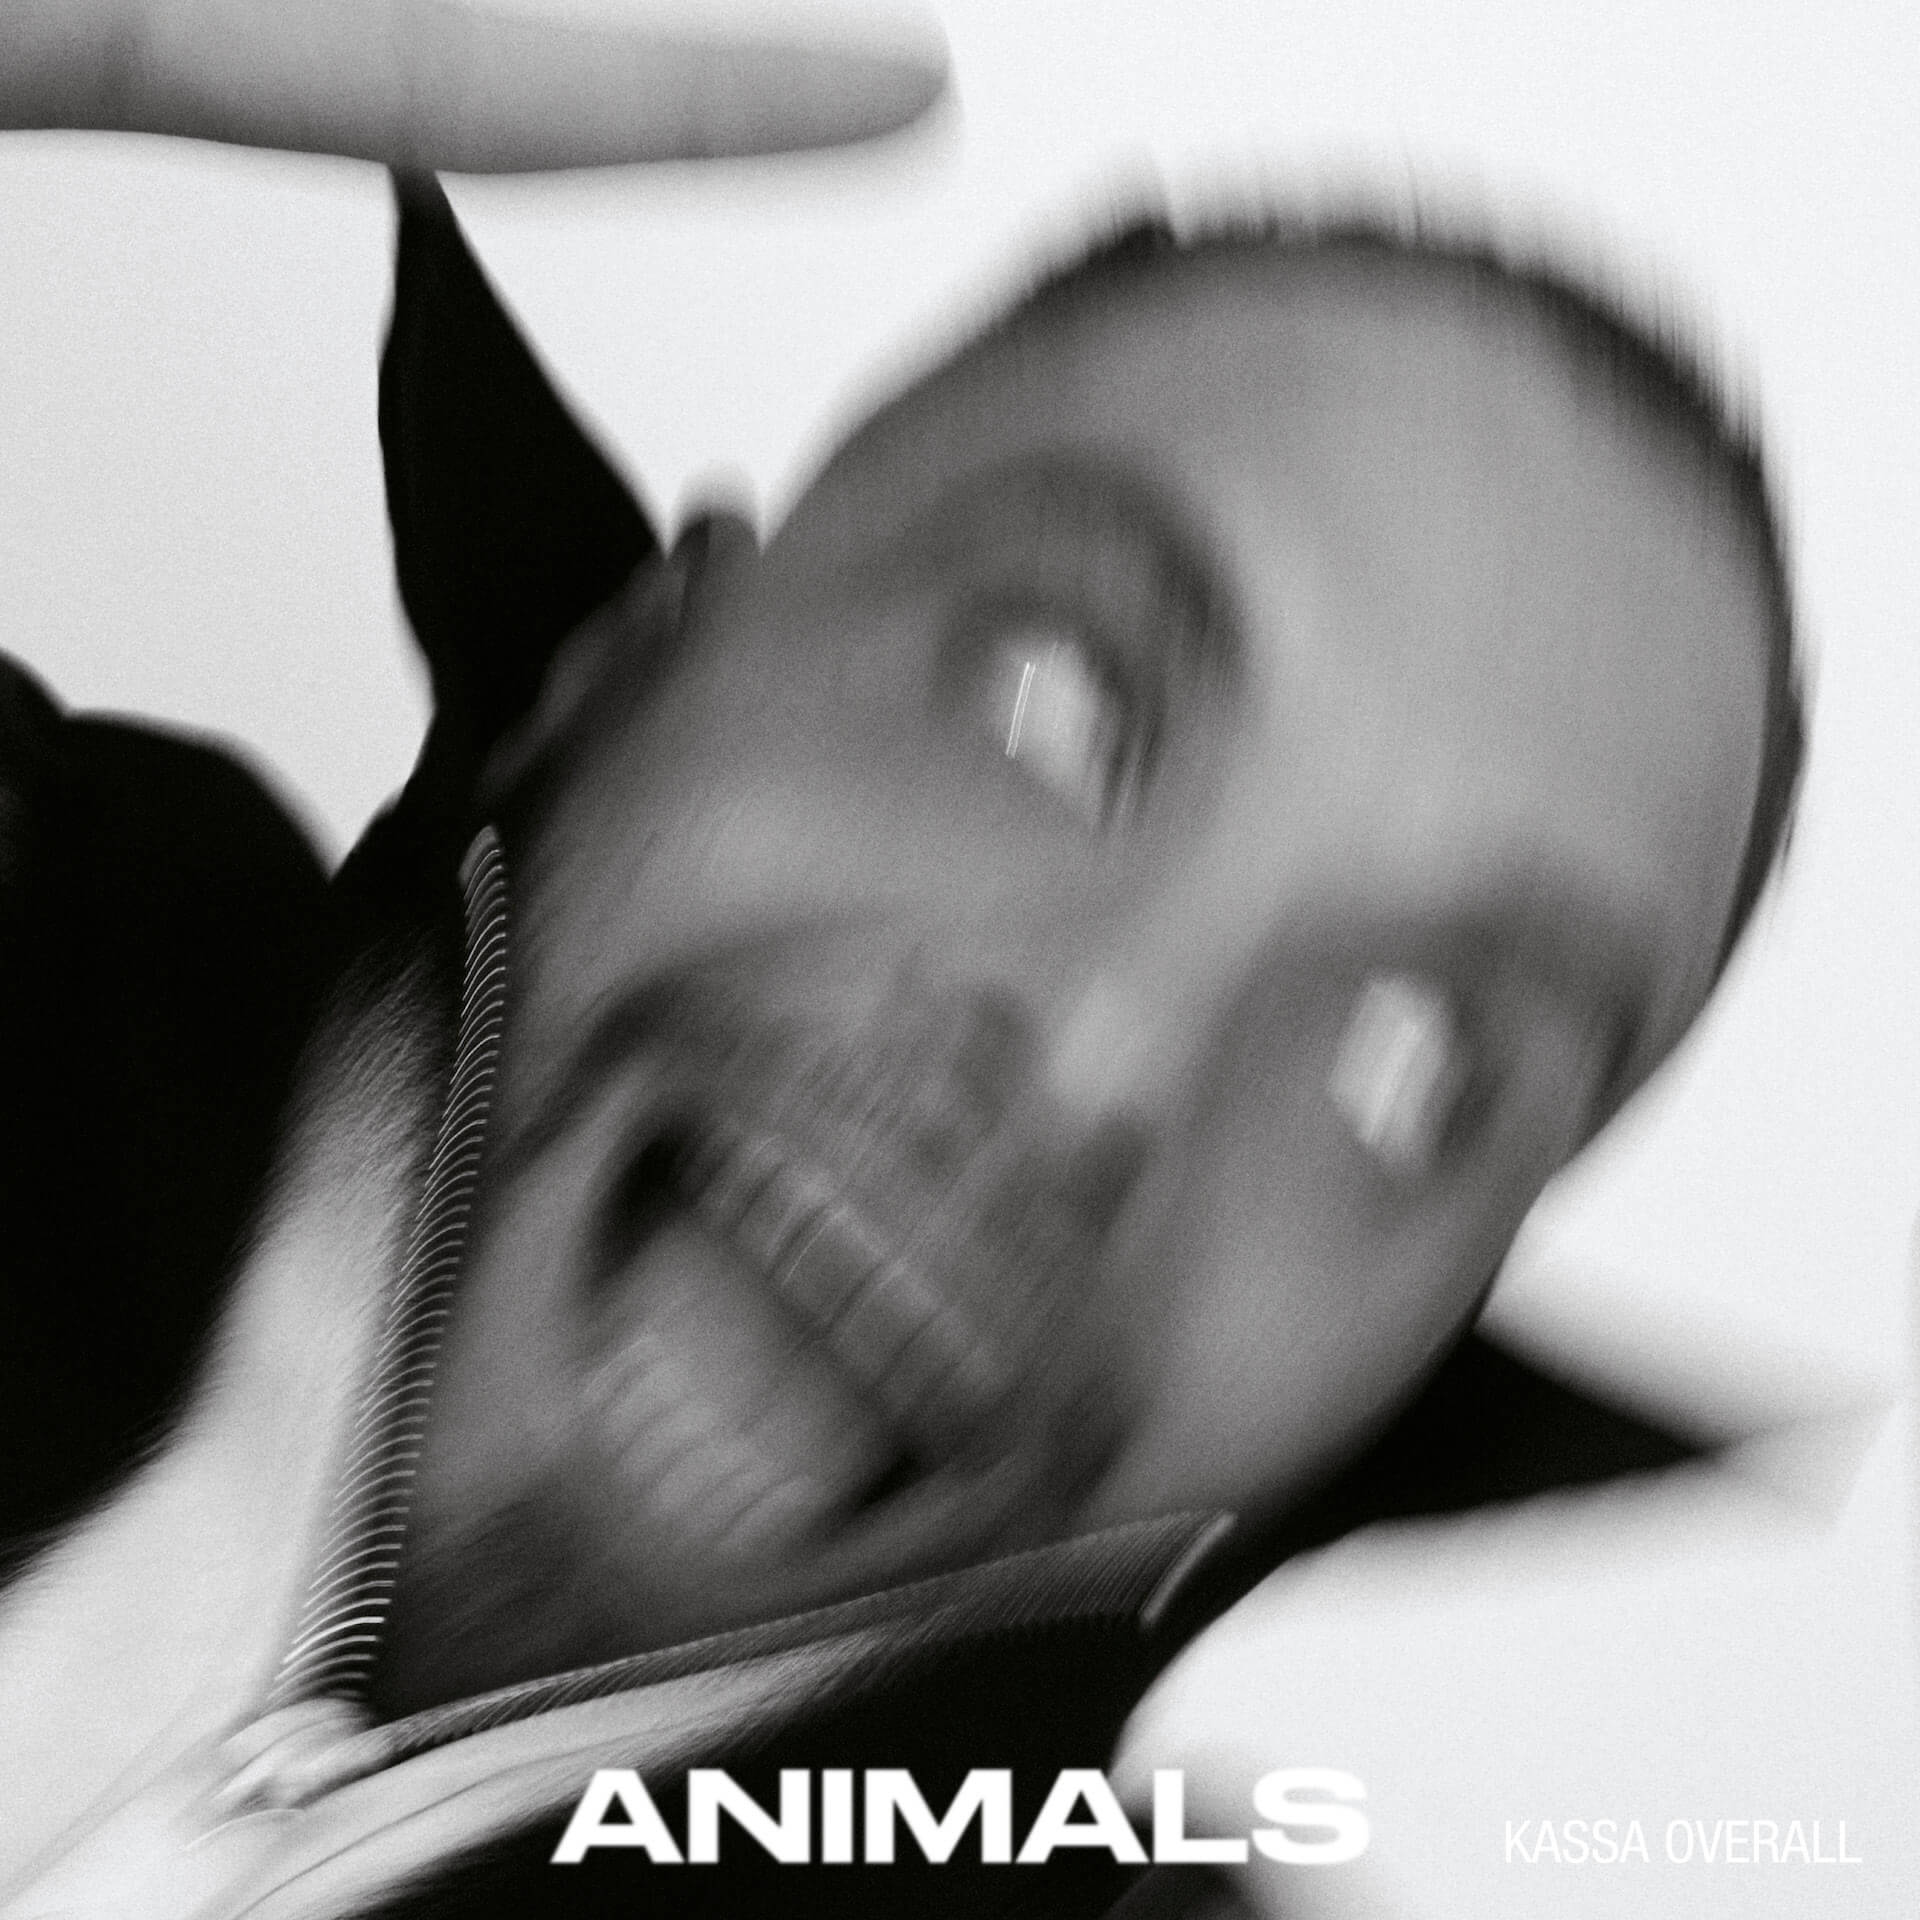 Kassa Overall待望の最新作『ANIMALS』よりLil B、Shabazz Palaces、Francis and the Lights参加の新曲「Going Up」が公開｜期間限定の購入特典も WARP351_Packshot_Hires